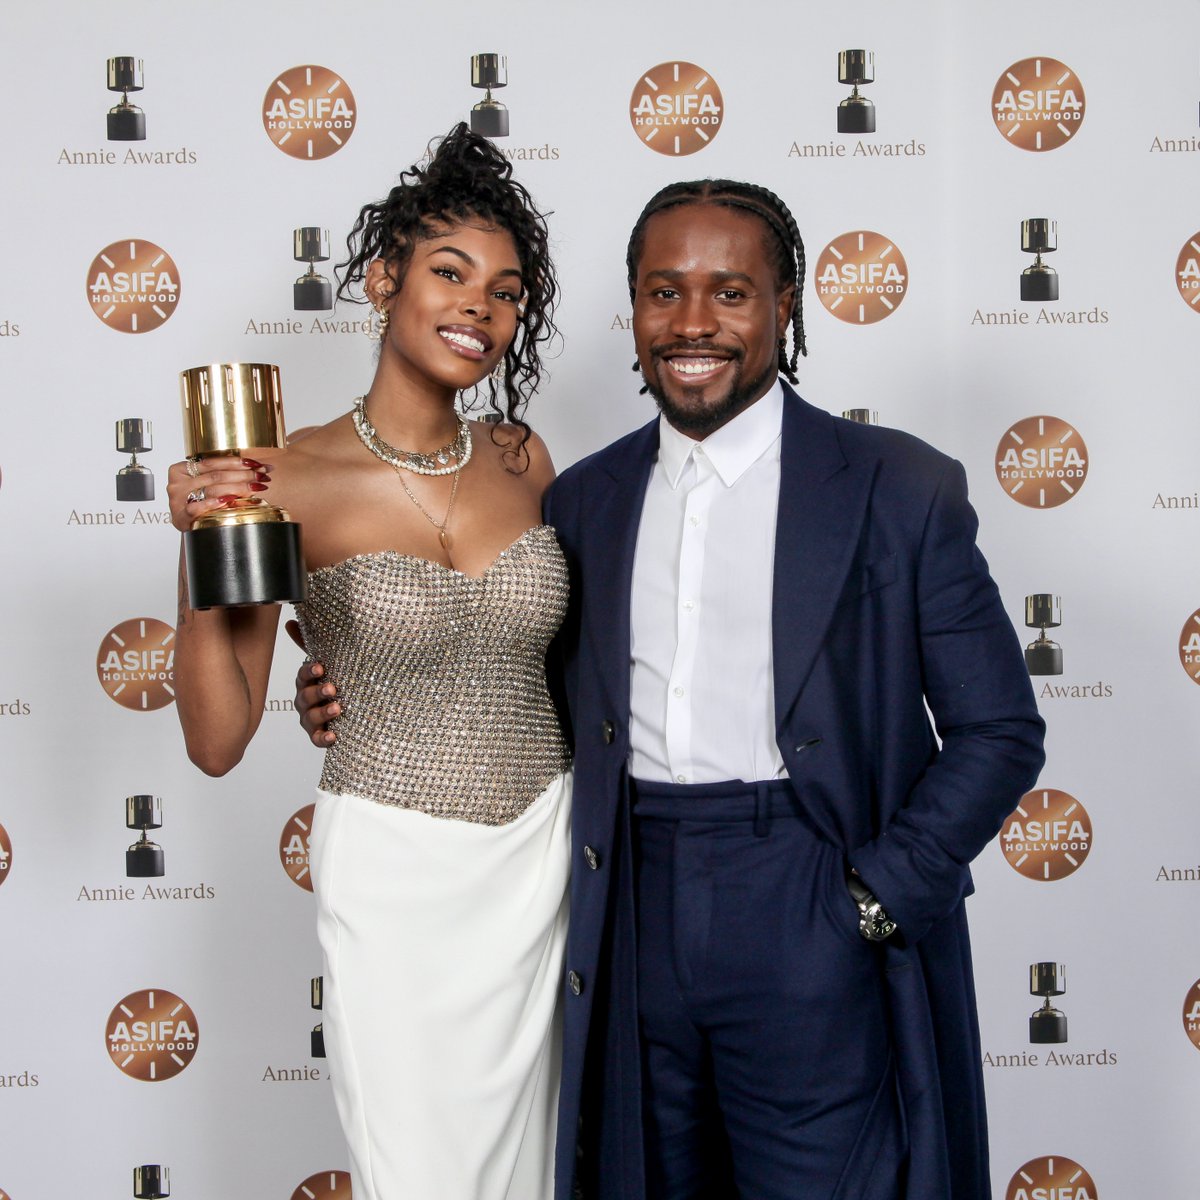 Congratulations to Diamond White (Lunella Lafayette / Moon Girl) from Moon Girl and Devil Dinosaur for winning the Annie Award for Best Voice Acting - TV/Media! @disneytva @diamondwhite #51stannieawards #asifahollywood